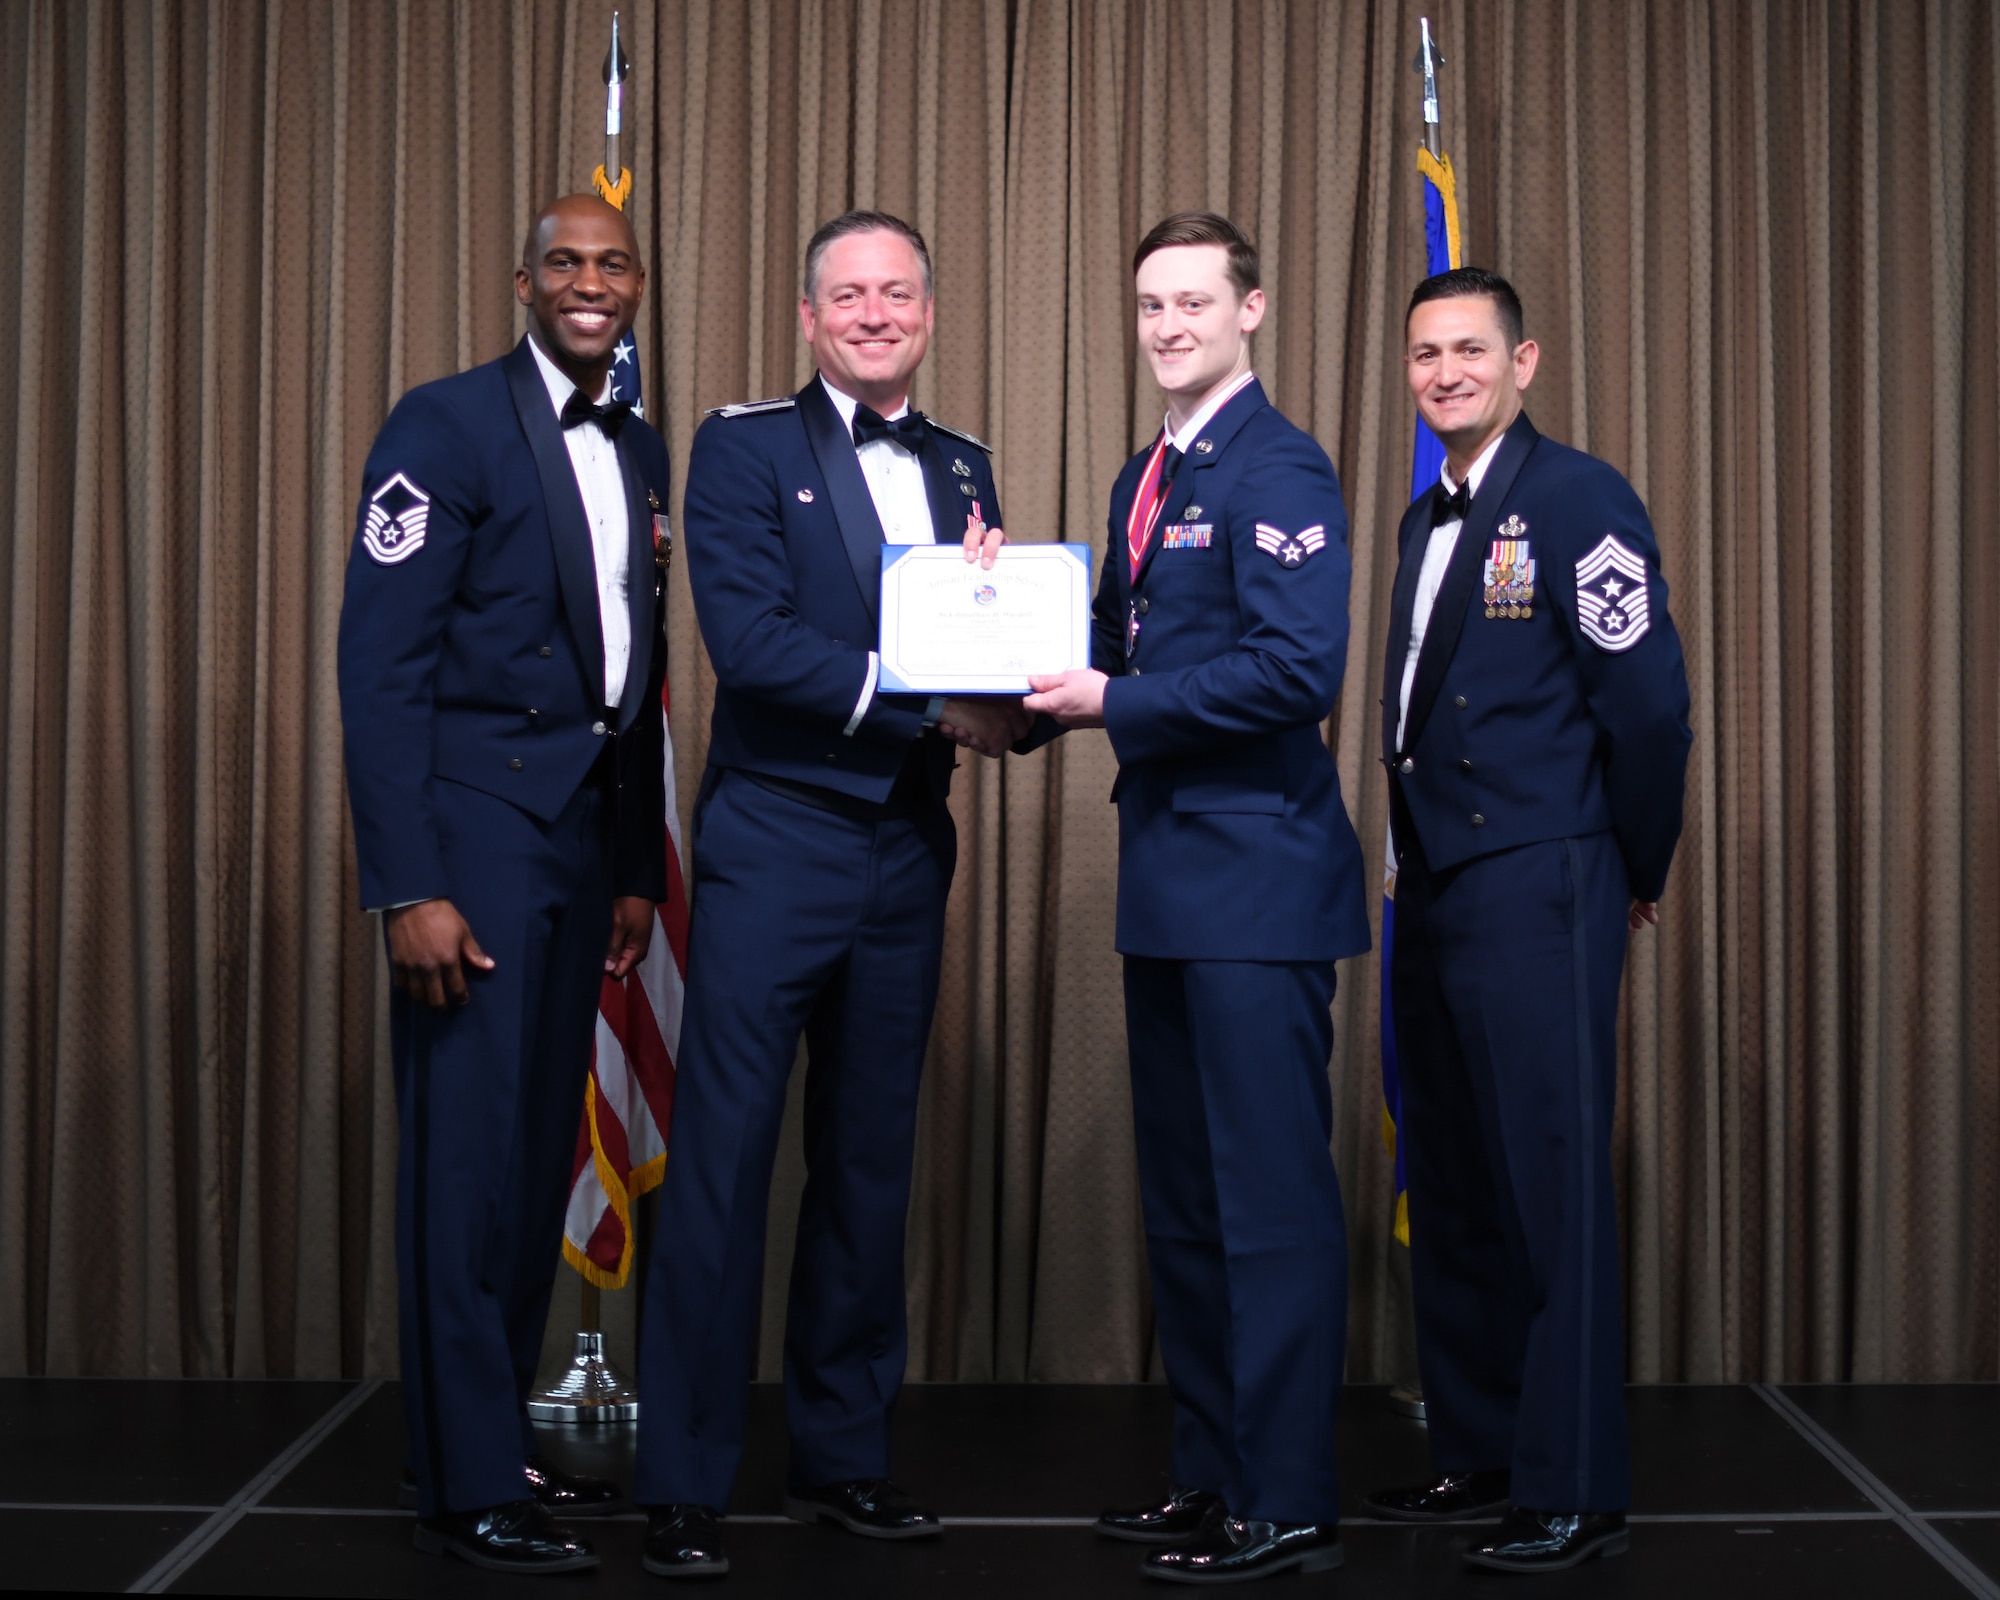 Col. Benjamin Spencer, 319th Air Base Wing commander, presents diploma to SrA Jonathan Wardell, Etchberger Airman Leadership School graduate, June 20, 2019, on Grand Forks Air Force Base, North Dakota. ALS graduation is the culmination of the first level of the Enlisted Professional Military Education continuum directed toward preparing upcoming noncommissioned officers with leadership skills for their careers. (U.S. Air Force photo by Senior Airman Elijaih Tiggs)